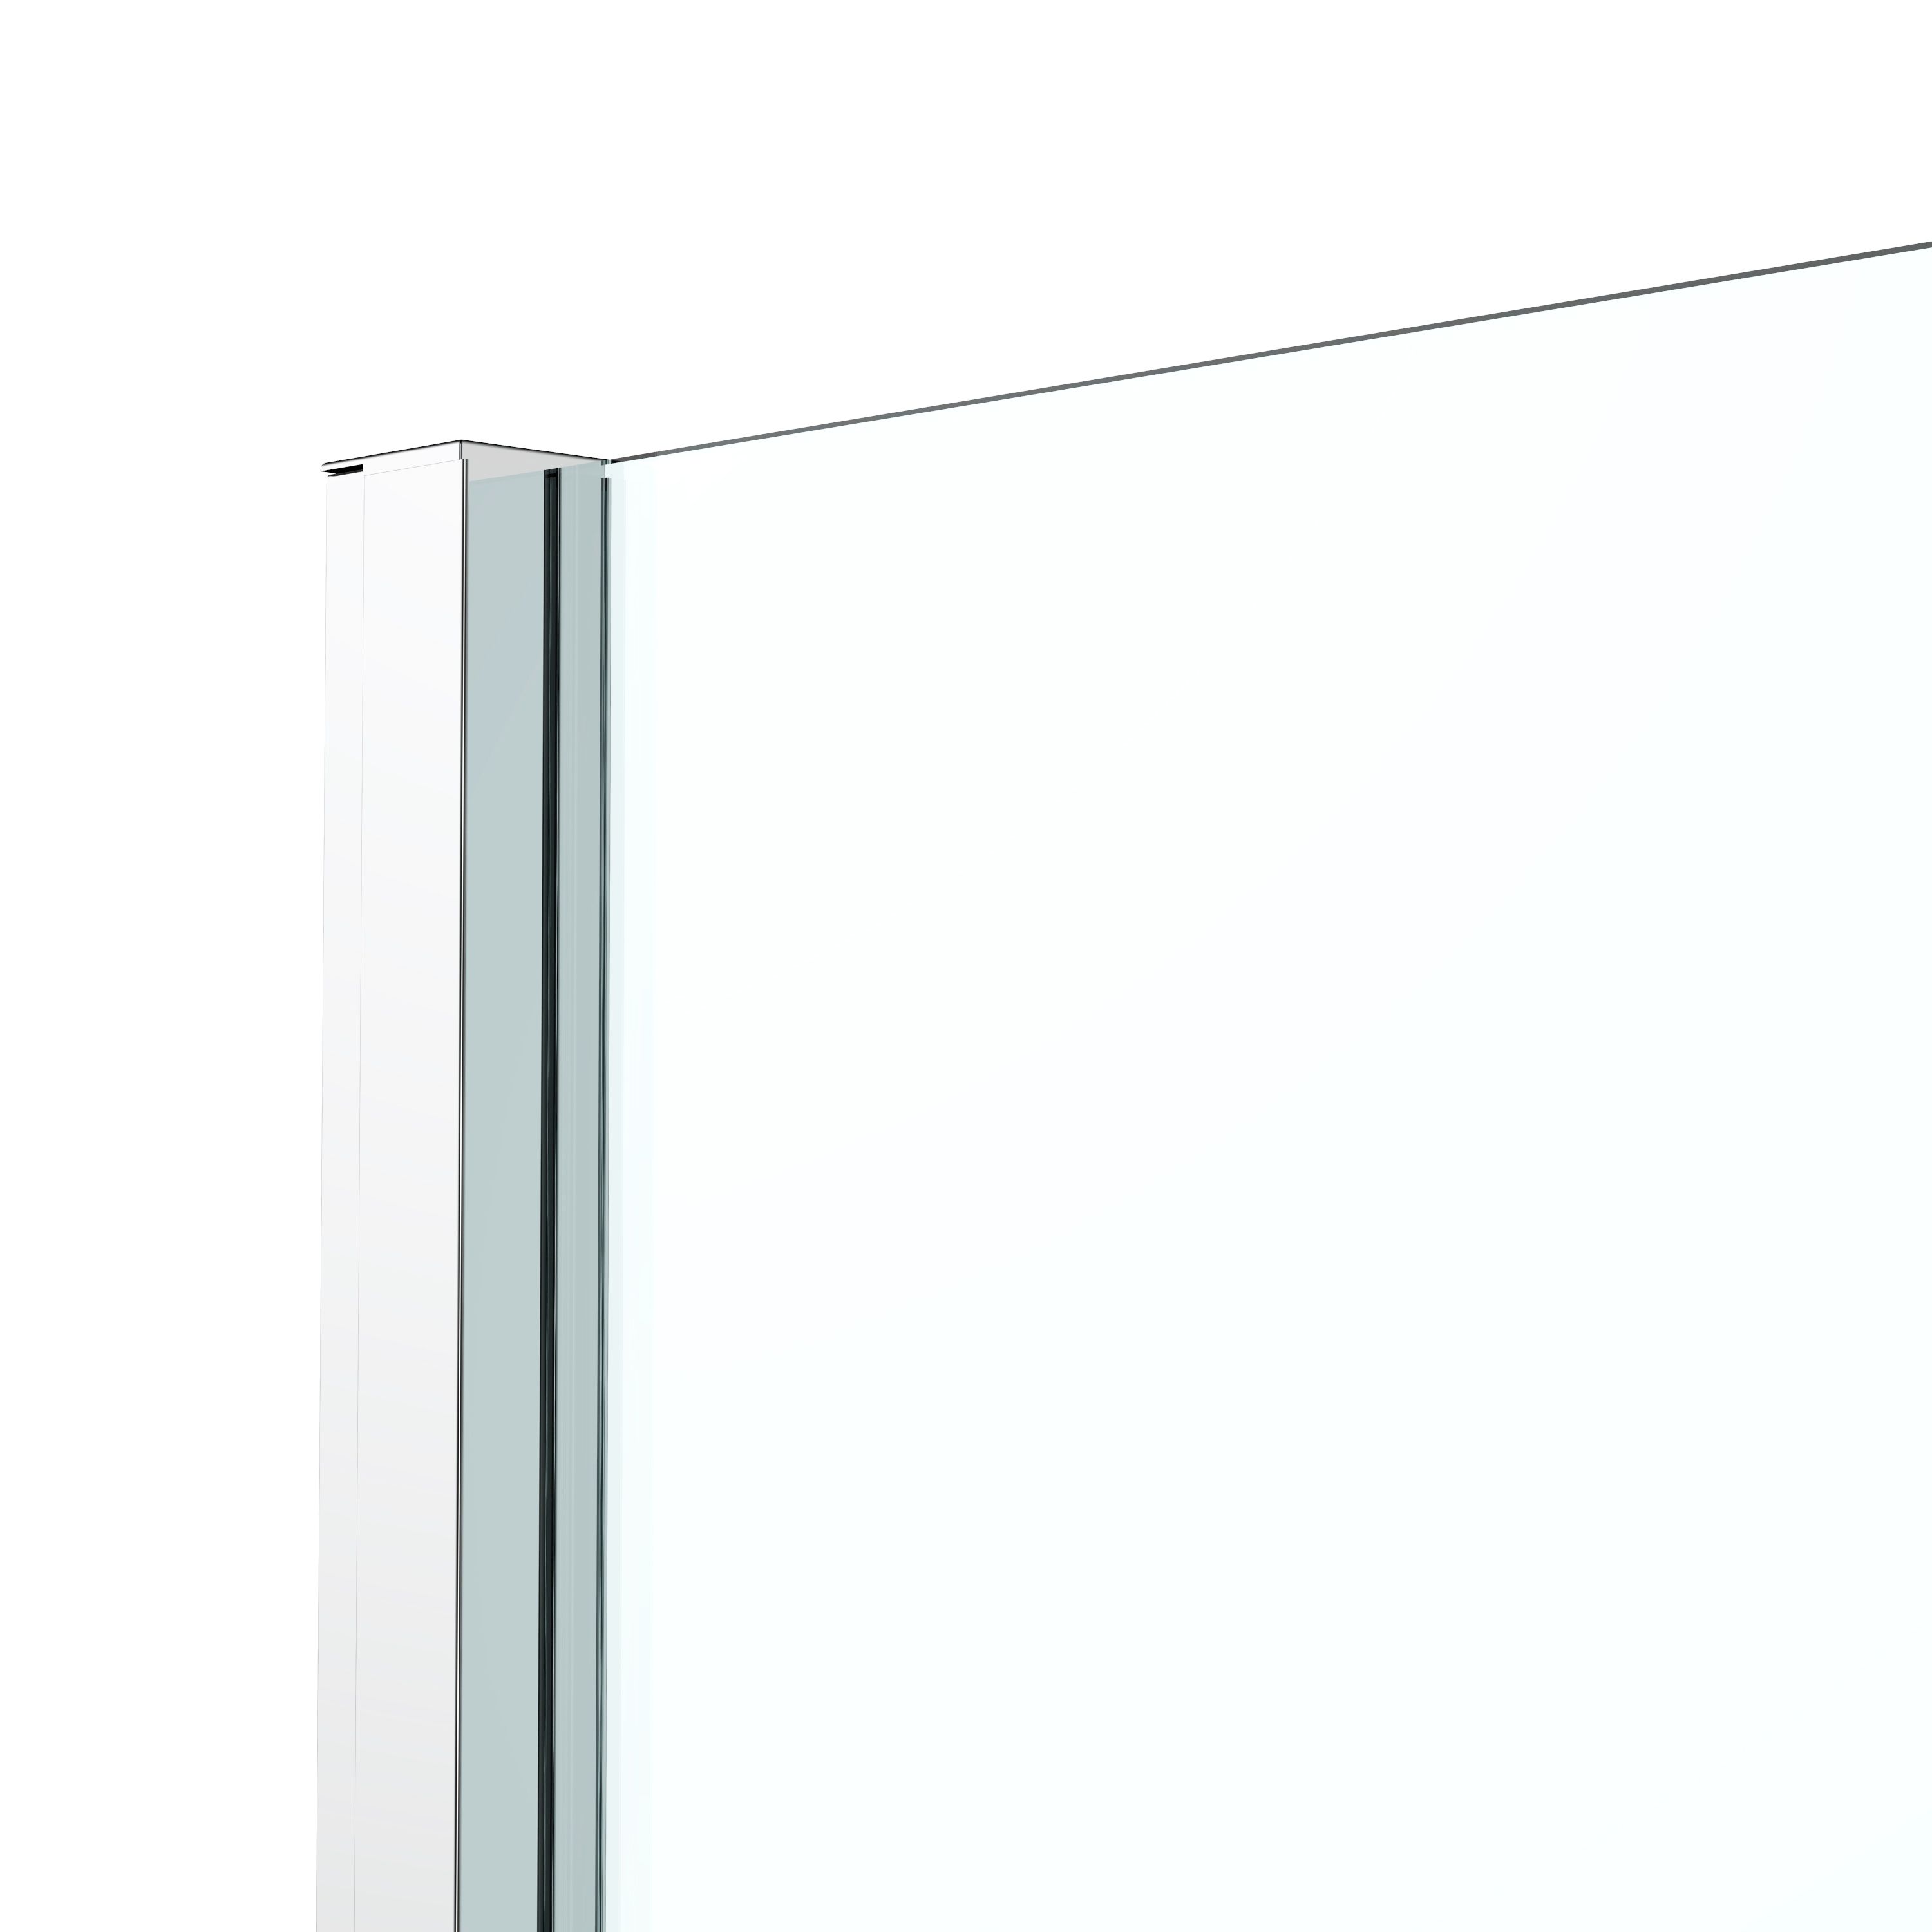 GoodHome Ledava Gloss Clear Fixed Side End panel (H)195cm (W)80cm